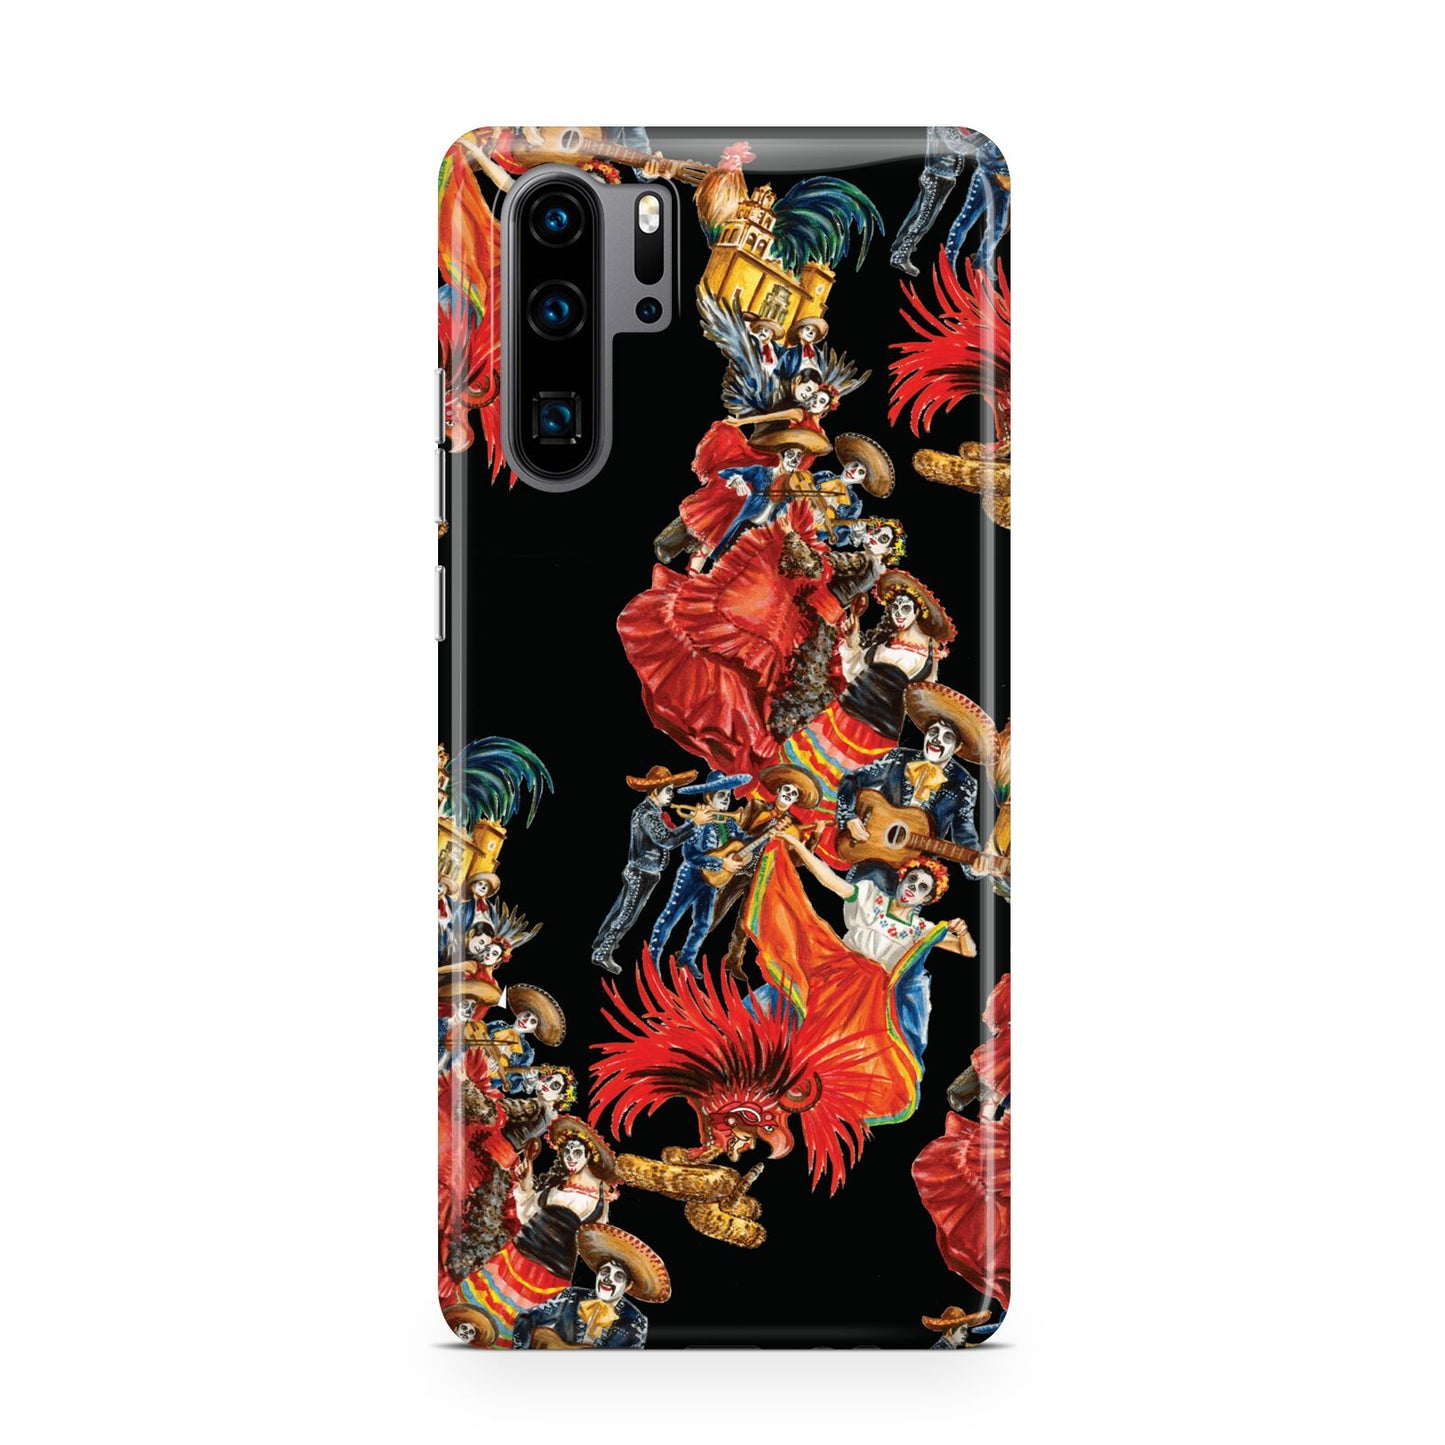 Day of the Dead Festival Huawei P30 Pro Phone Case